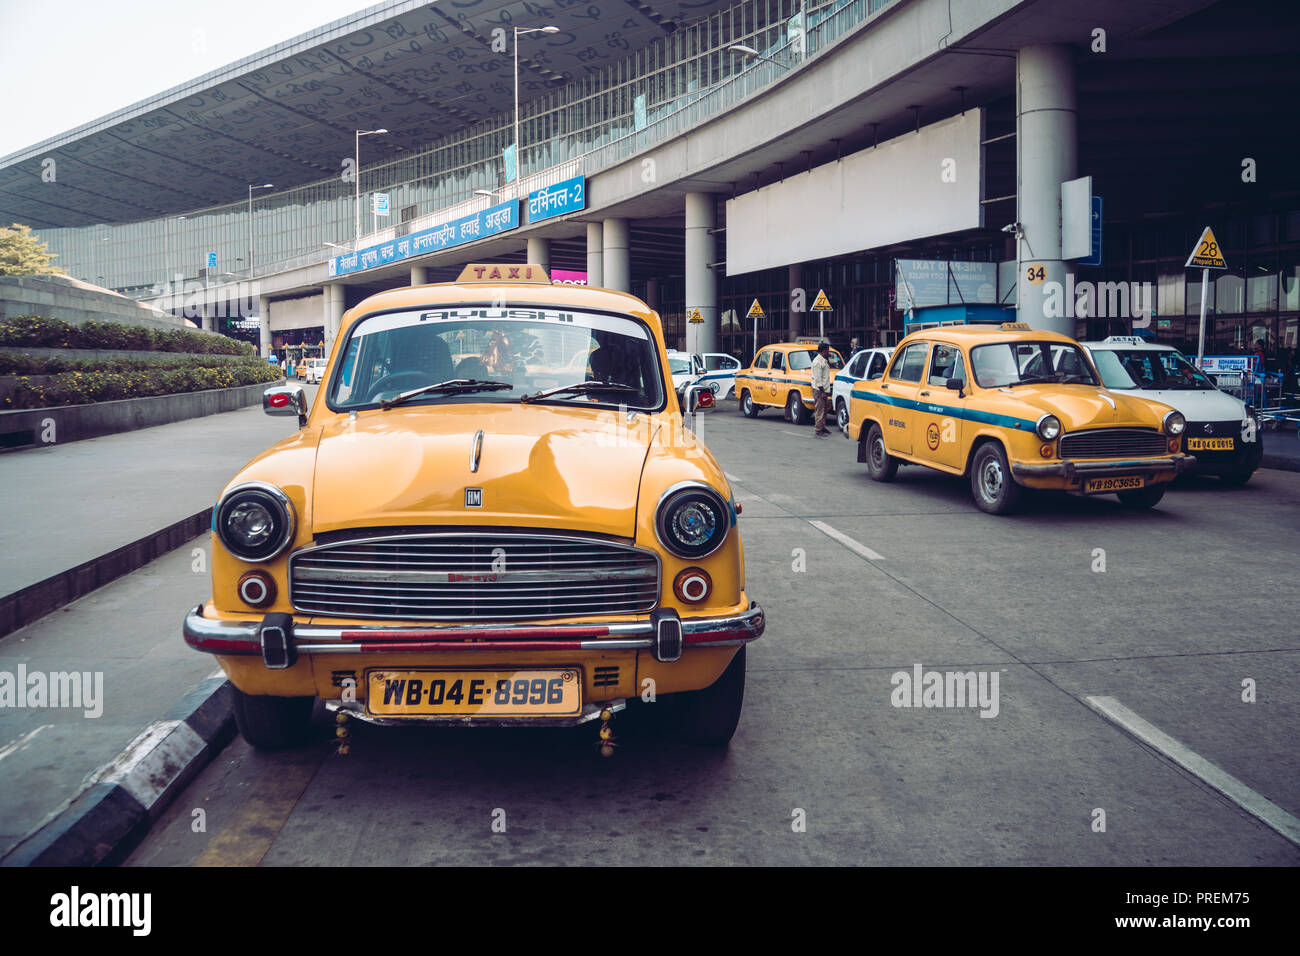 Vintage yellow taxi in the airport Parking lot. KOLKATA, INDIA - 26 January 2018. Stock Photo